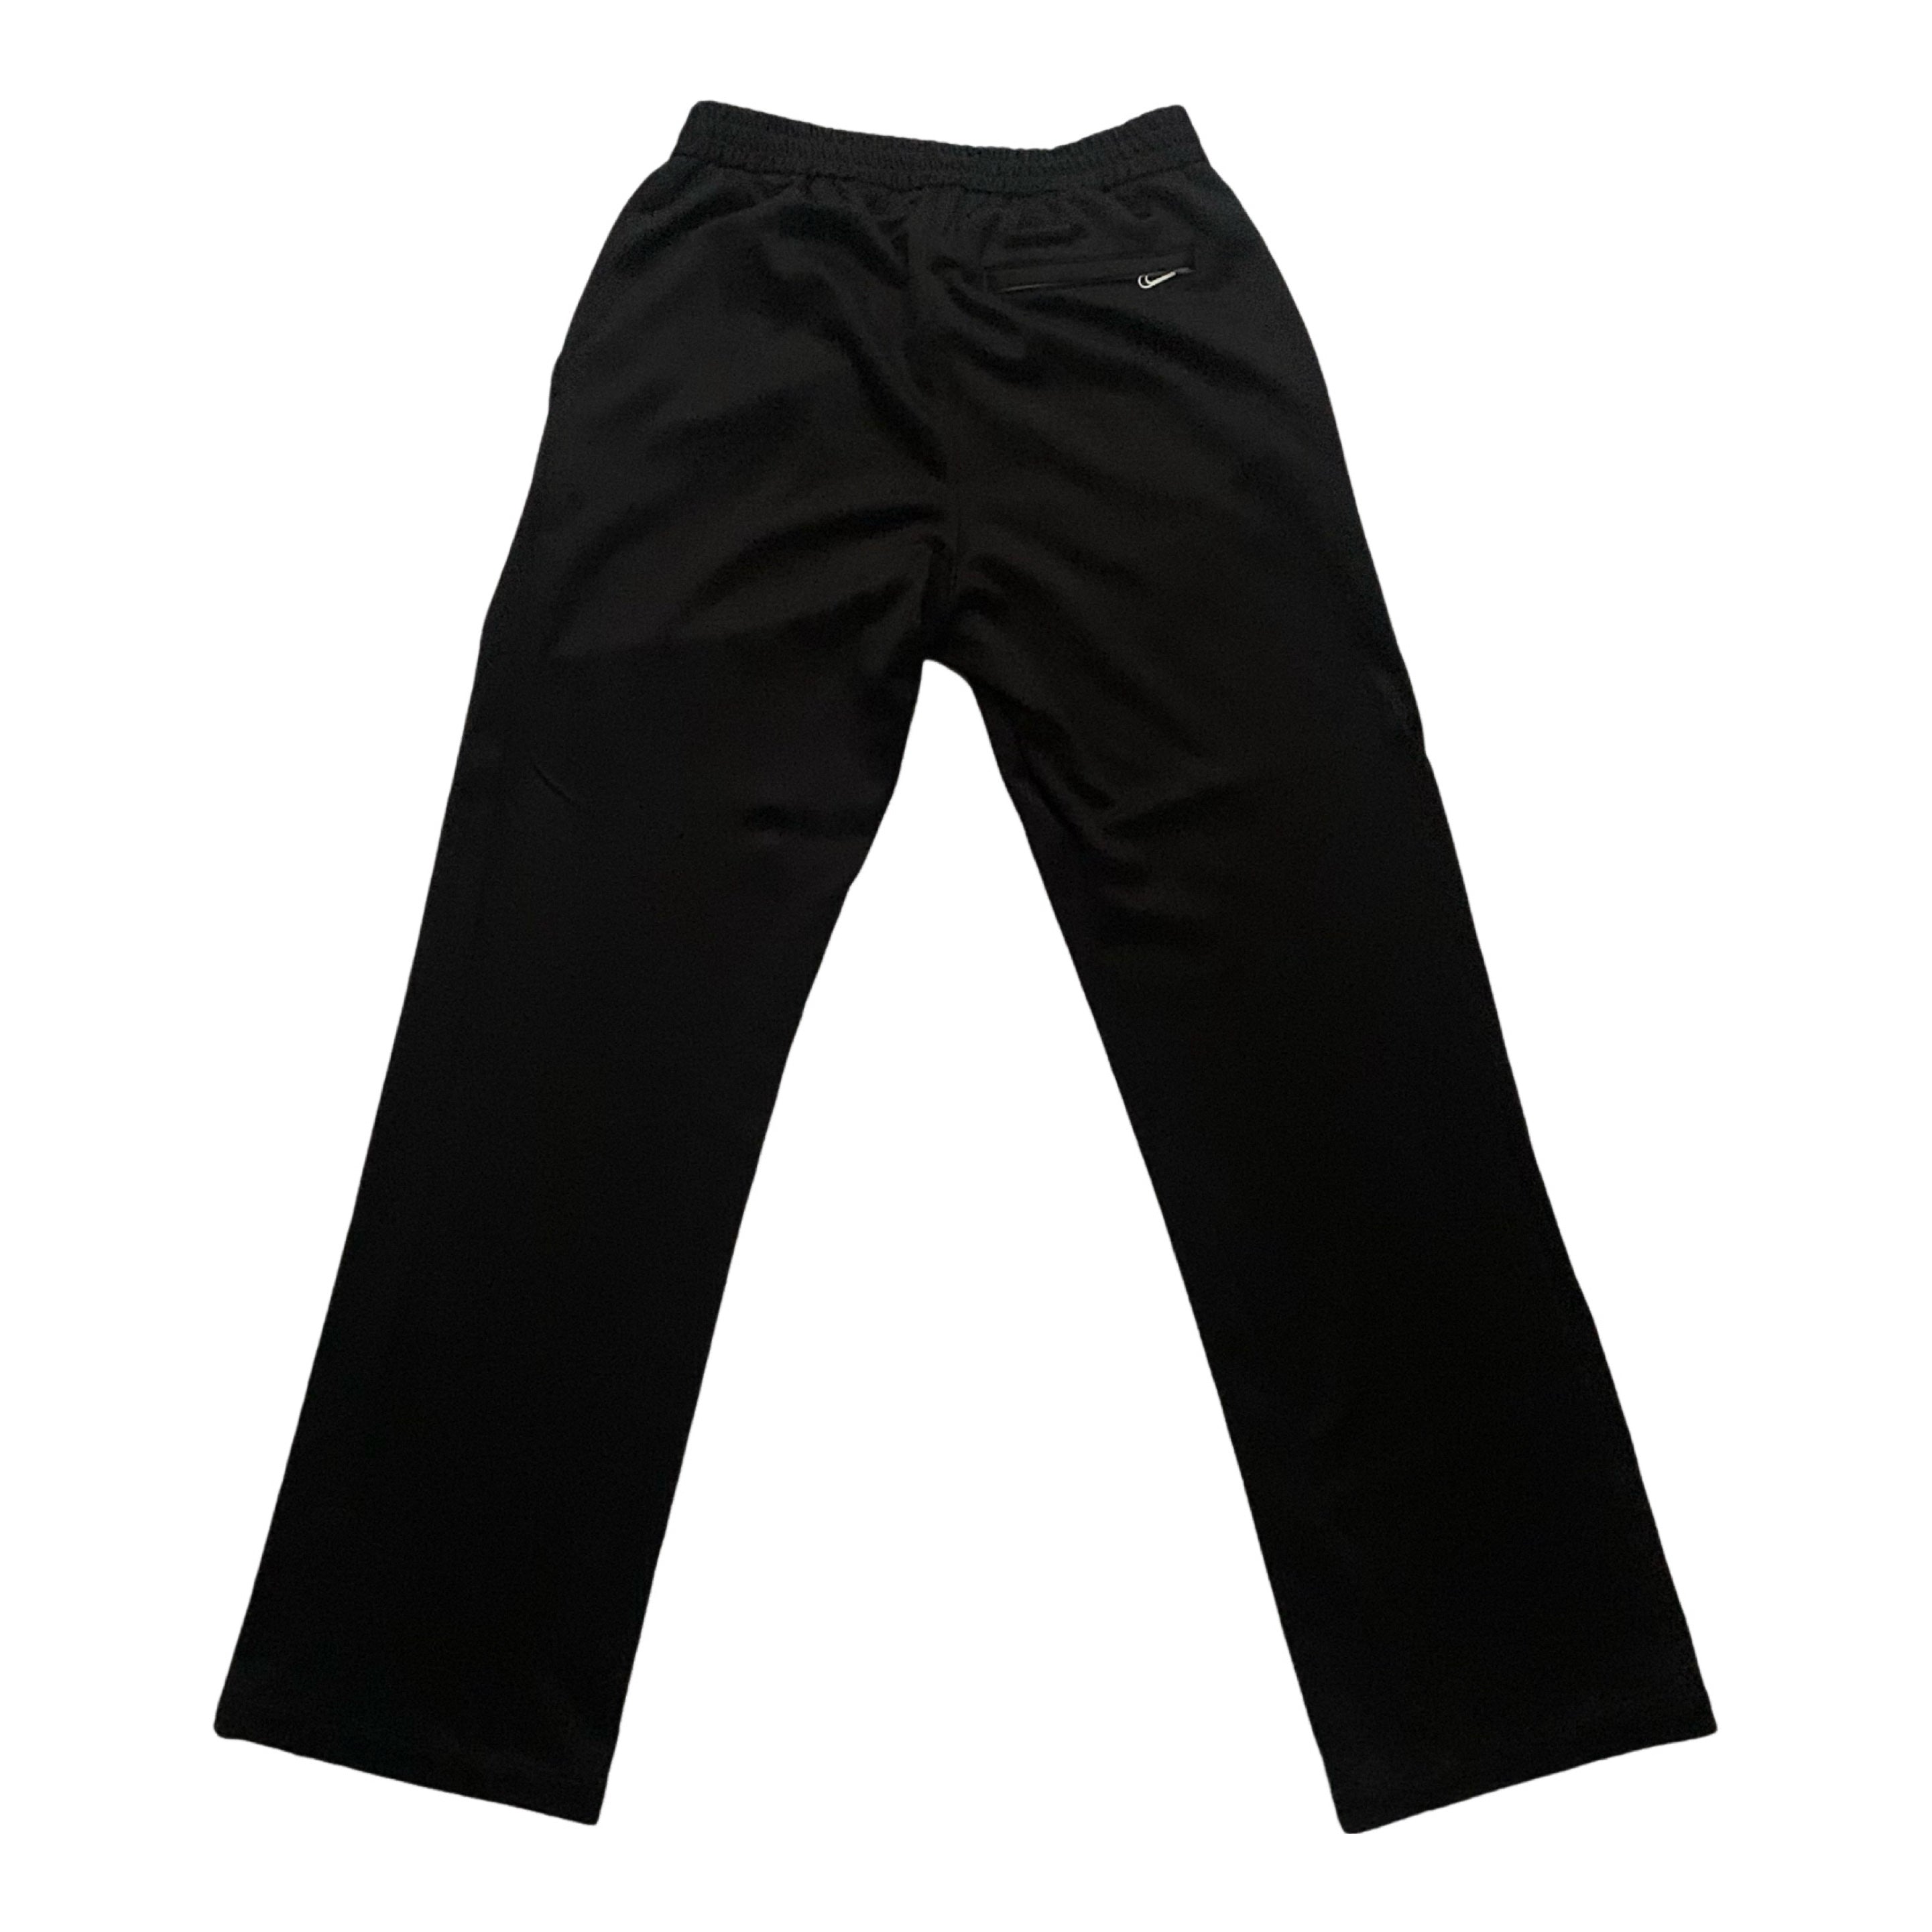 Off White Small Arrows Track Pant Bottoms Black Virgil Abloh